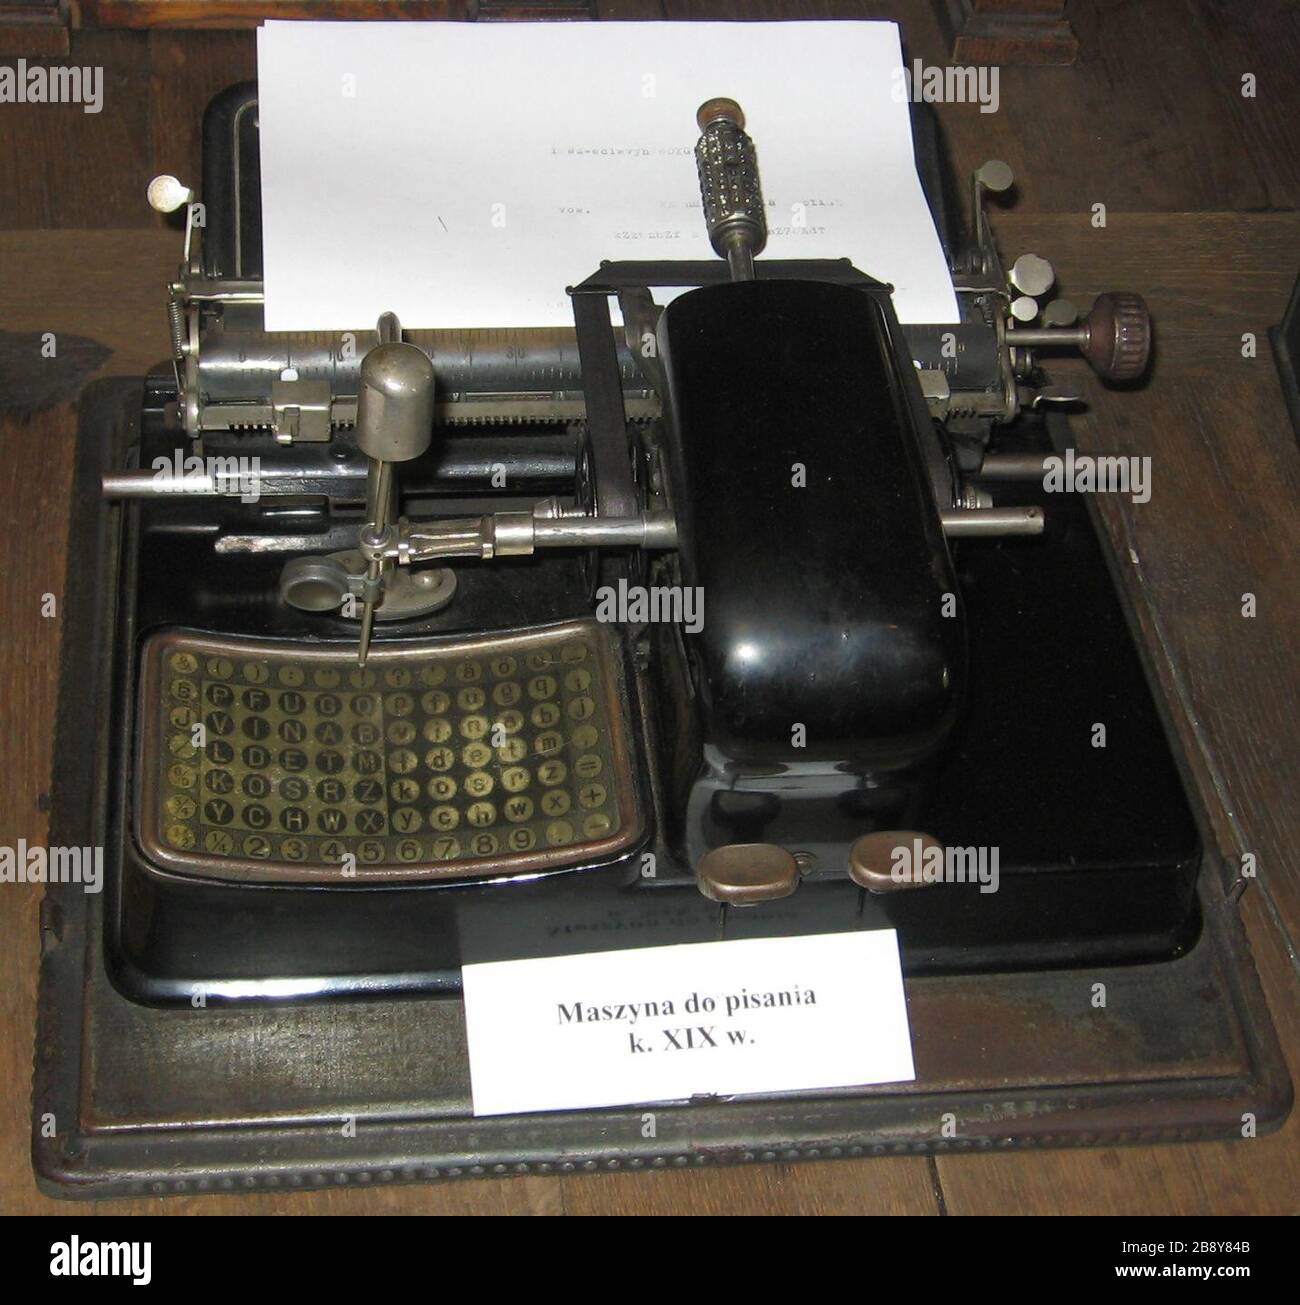 'English: Early typewriter, the Mignon, produced from 1905 to 1934 by Allgemeinen Elektrizitaets-Gesellschaft (AEG), Berlin, Germany. This was called an index typewriter; to operate it, the pointer was pointed at a letter, and the key to the right was pressed to type it.  The types are on a metal 'typesleeve' seen at top, which could be changed to type different fonts and character sets for different languages.  The Mignon was the most successful index typewriter, and was exported to other European countries.  This model was probably the Mignon 3, since it doesn't have a backspace key to the r Stock Photo